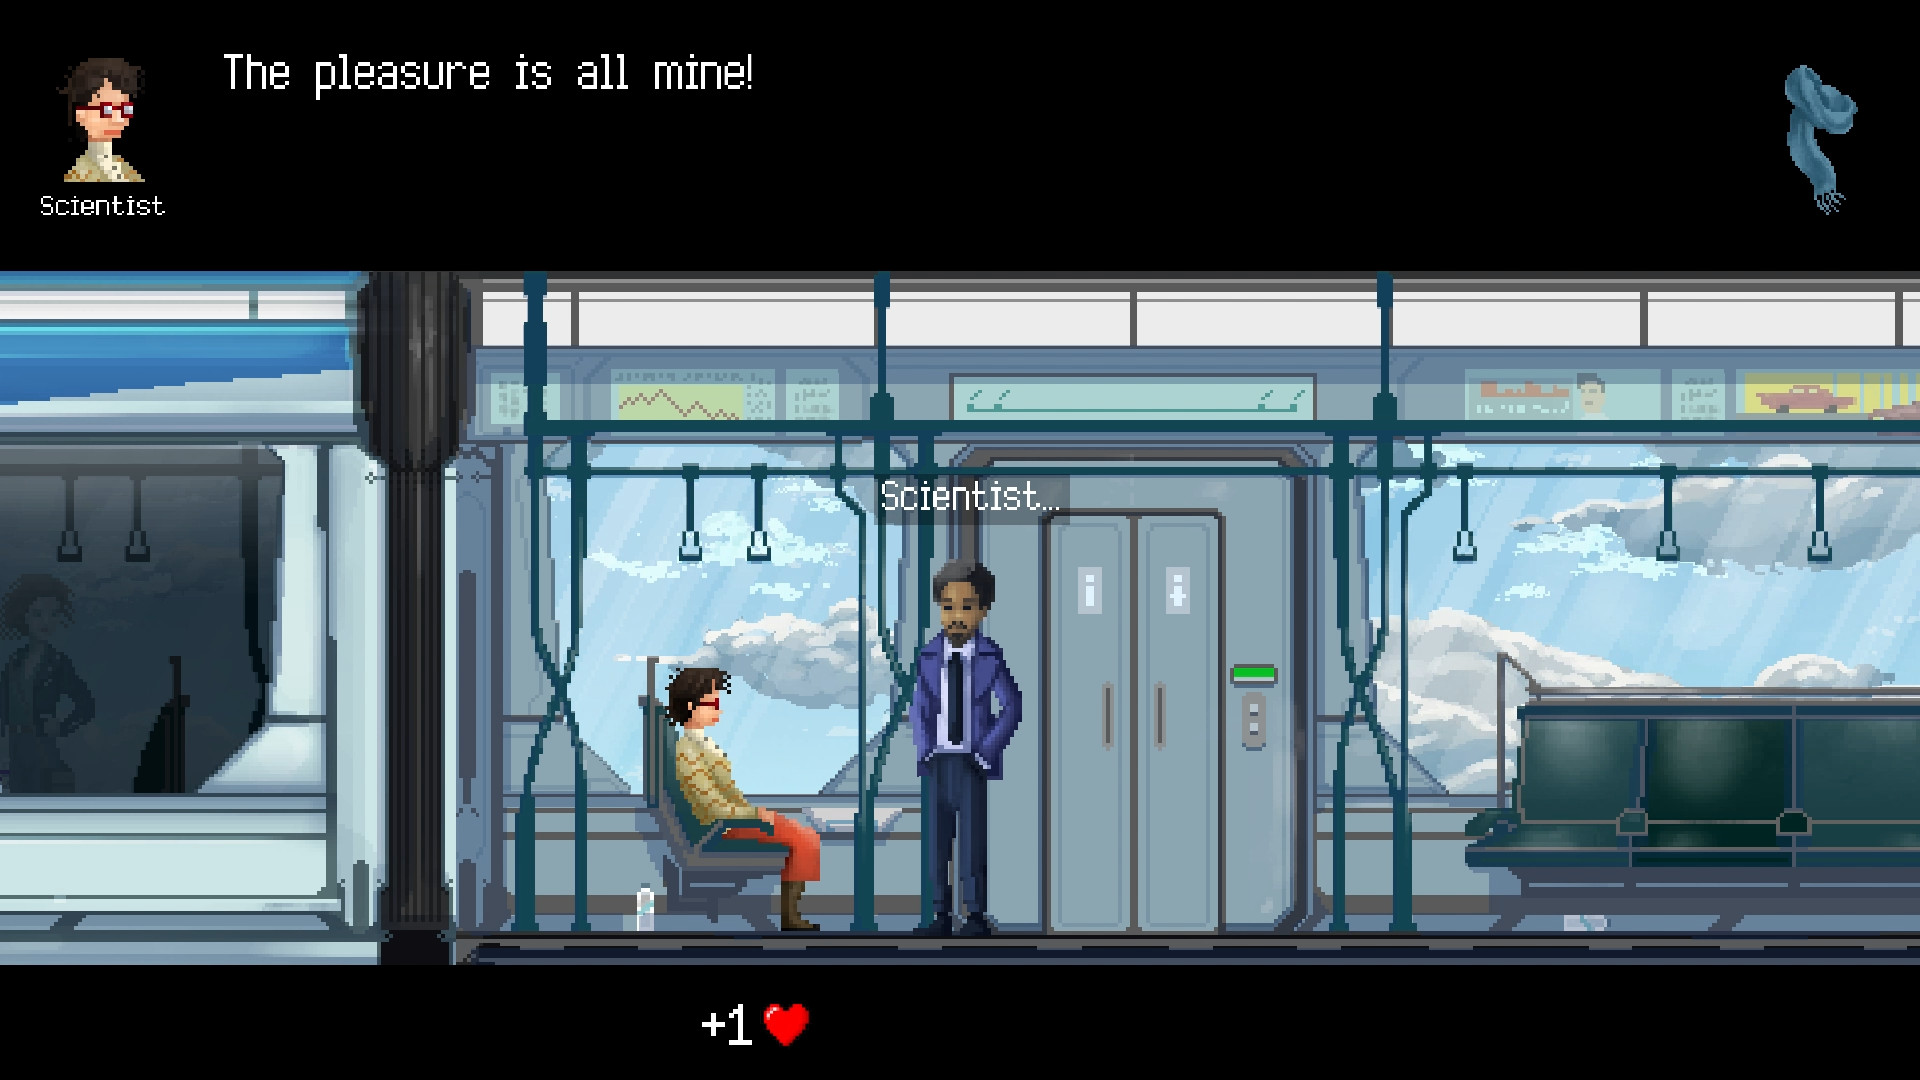 Monorail Stories Free Download for PC